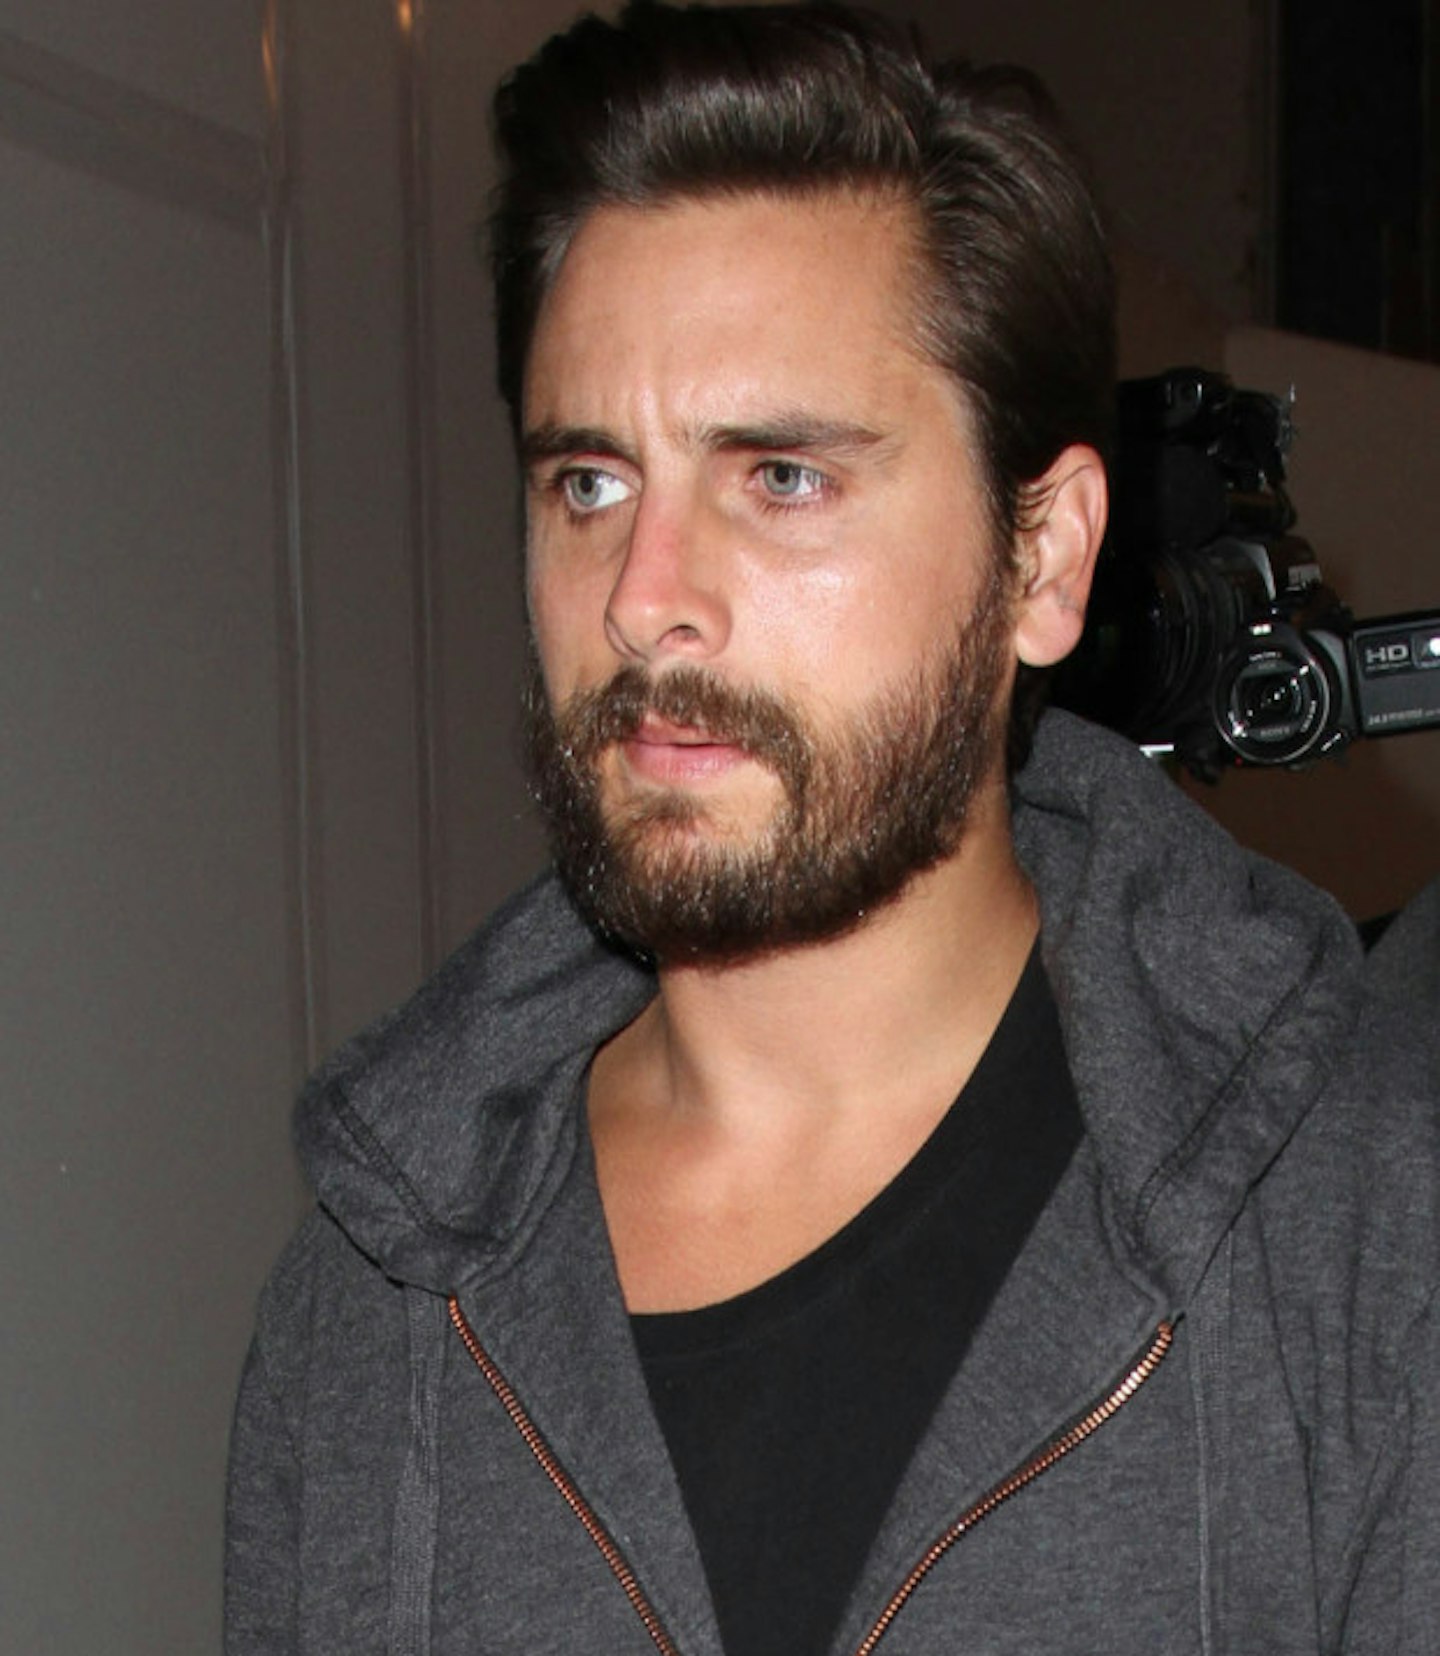 Scott Disick off Keeping Up With The Kardashians